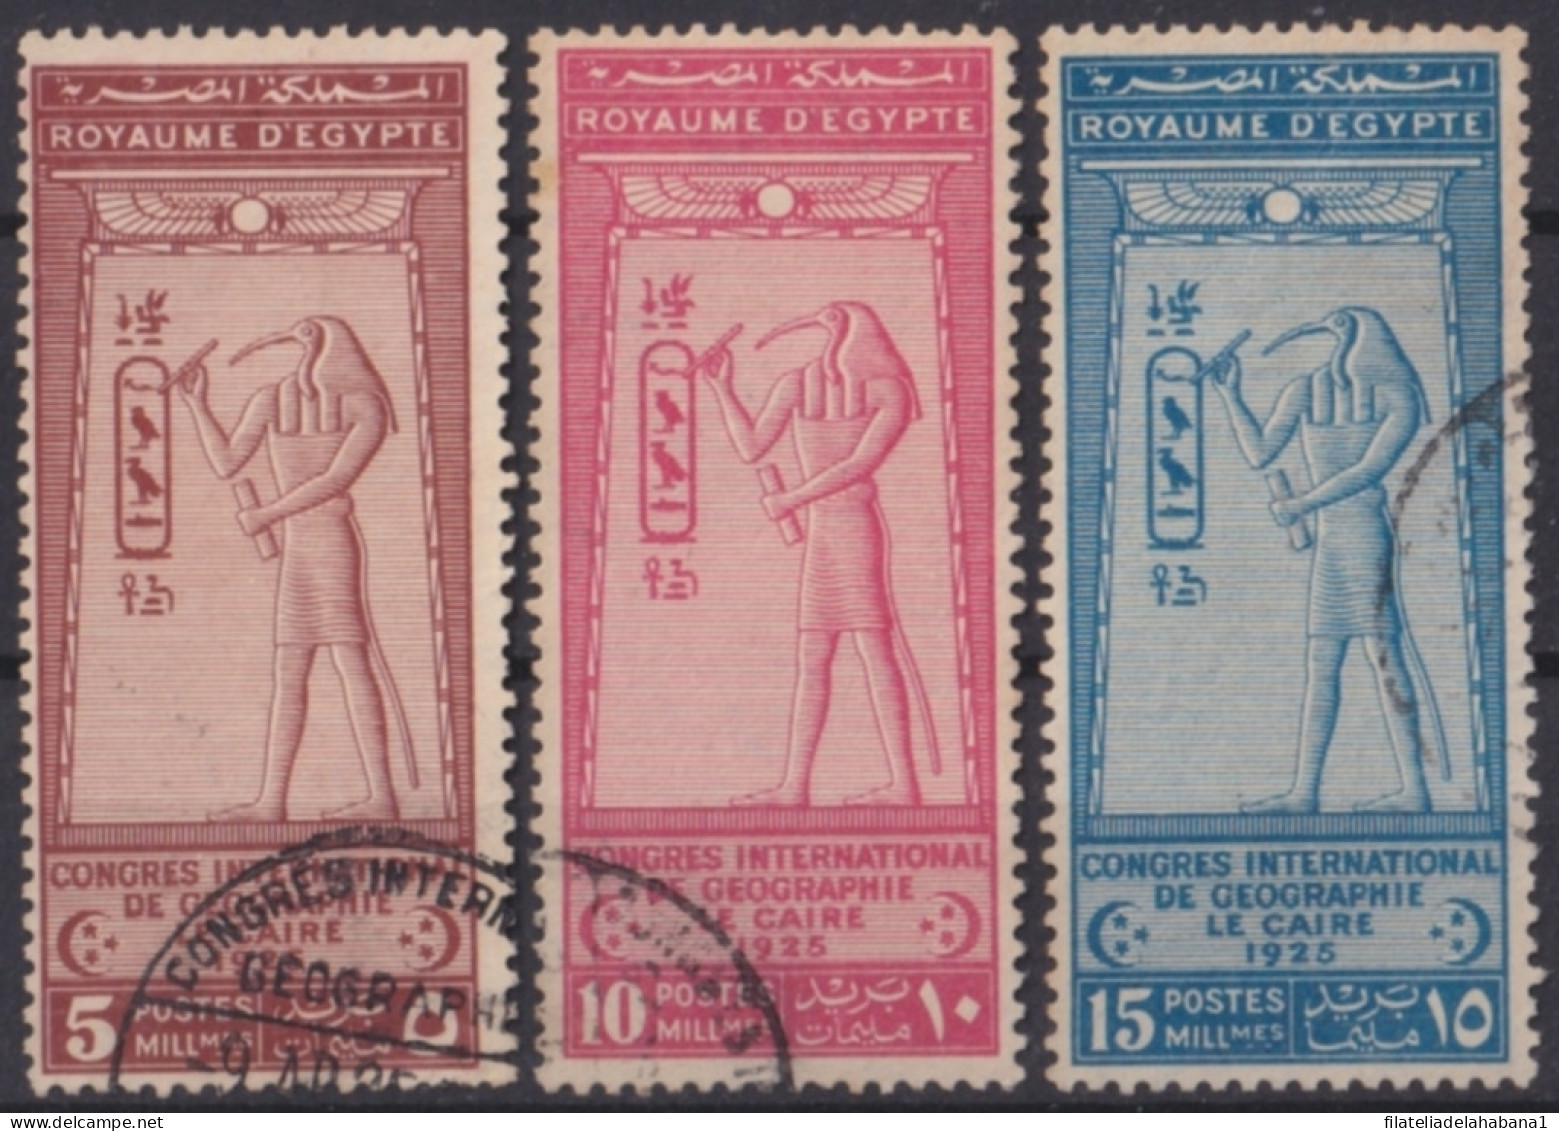 F-EX49957 EGYPT 1925 TOTH GEOGRAPHYCAL INTERNATIONAL CONGRESS USED.  - Unused Stamps